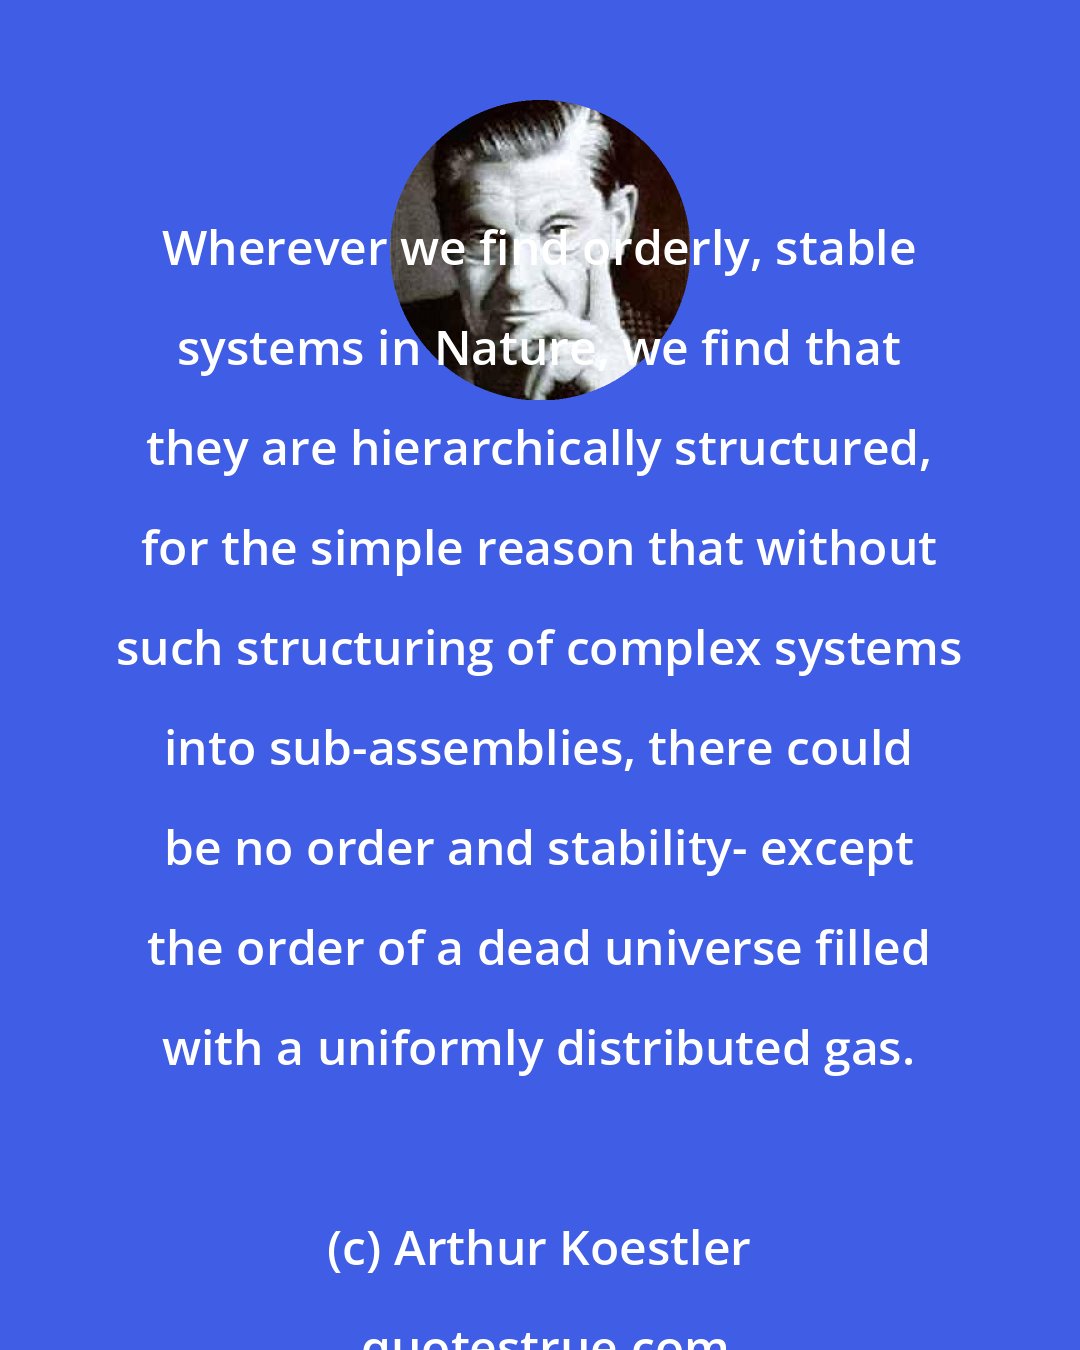 Arthur Koestler: Wherever we find orderly, stable systems in Nature, we find that they are hierarchically structured, for the simple reason that without such structuring of complex systems into sub-assemblies, there could be no order and stability- except the order of a dead universe filled with a uniformly distributed gas.